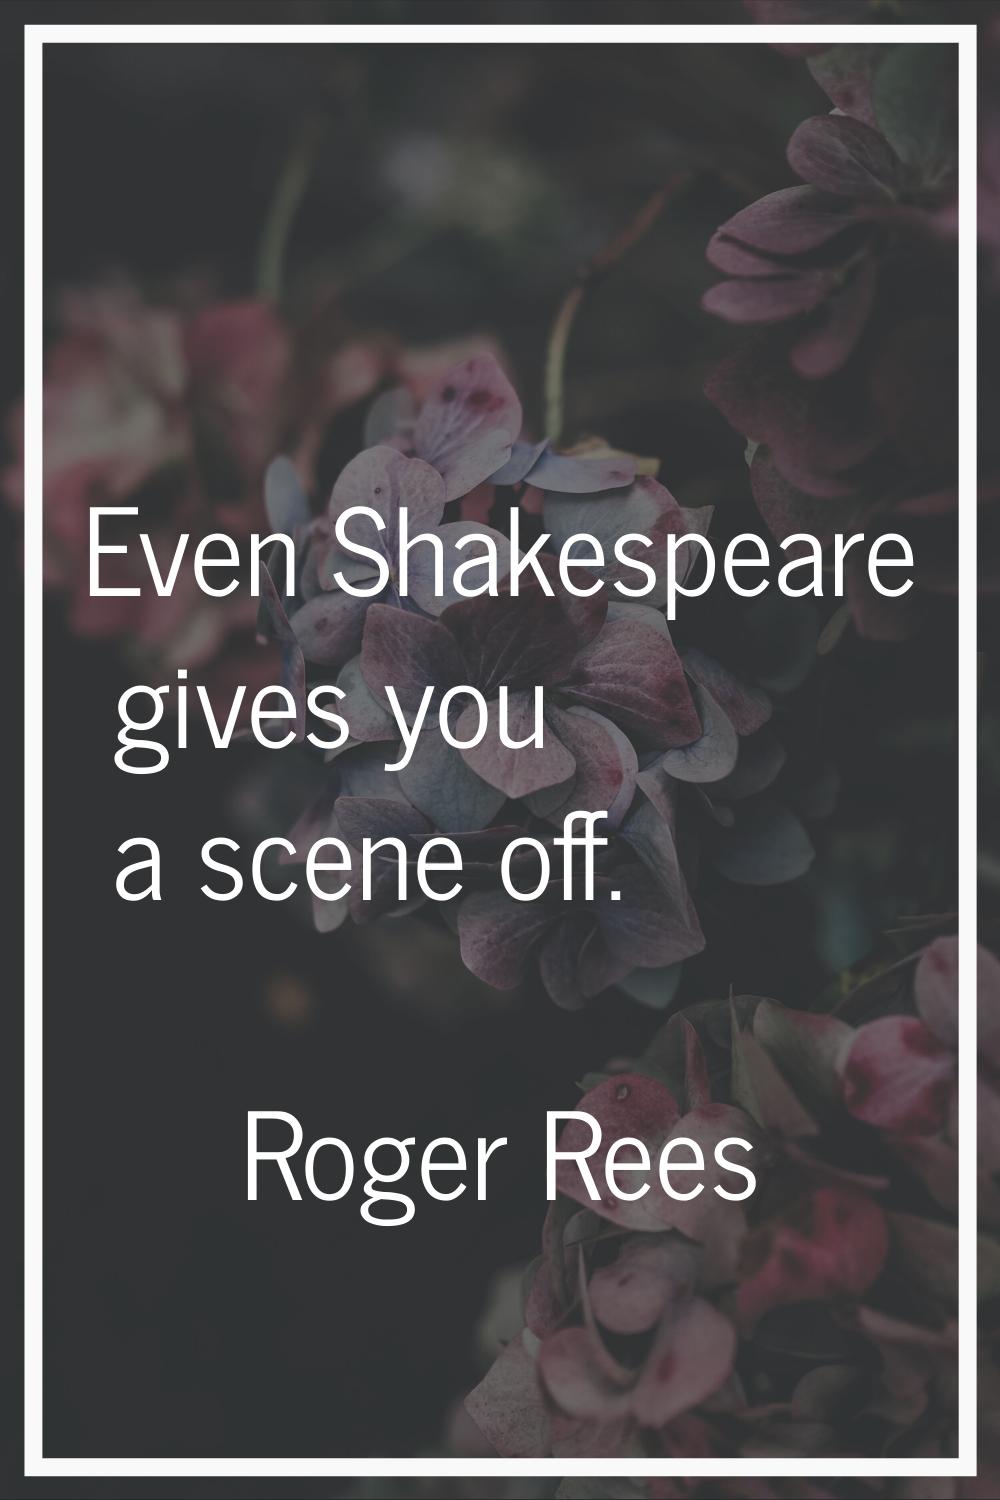 Even Shakespeare gives you a scene off.